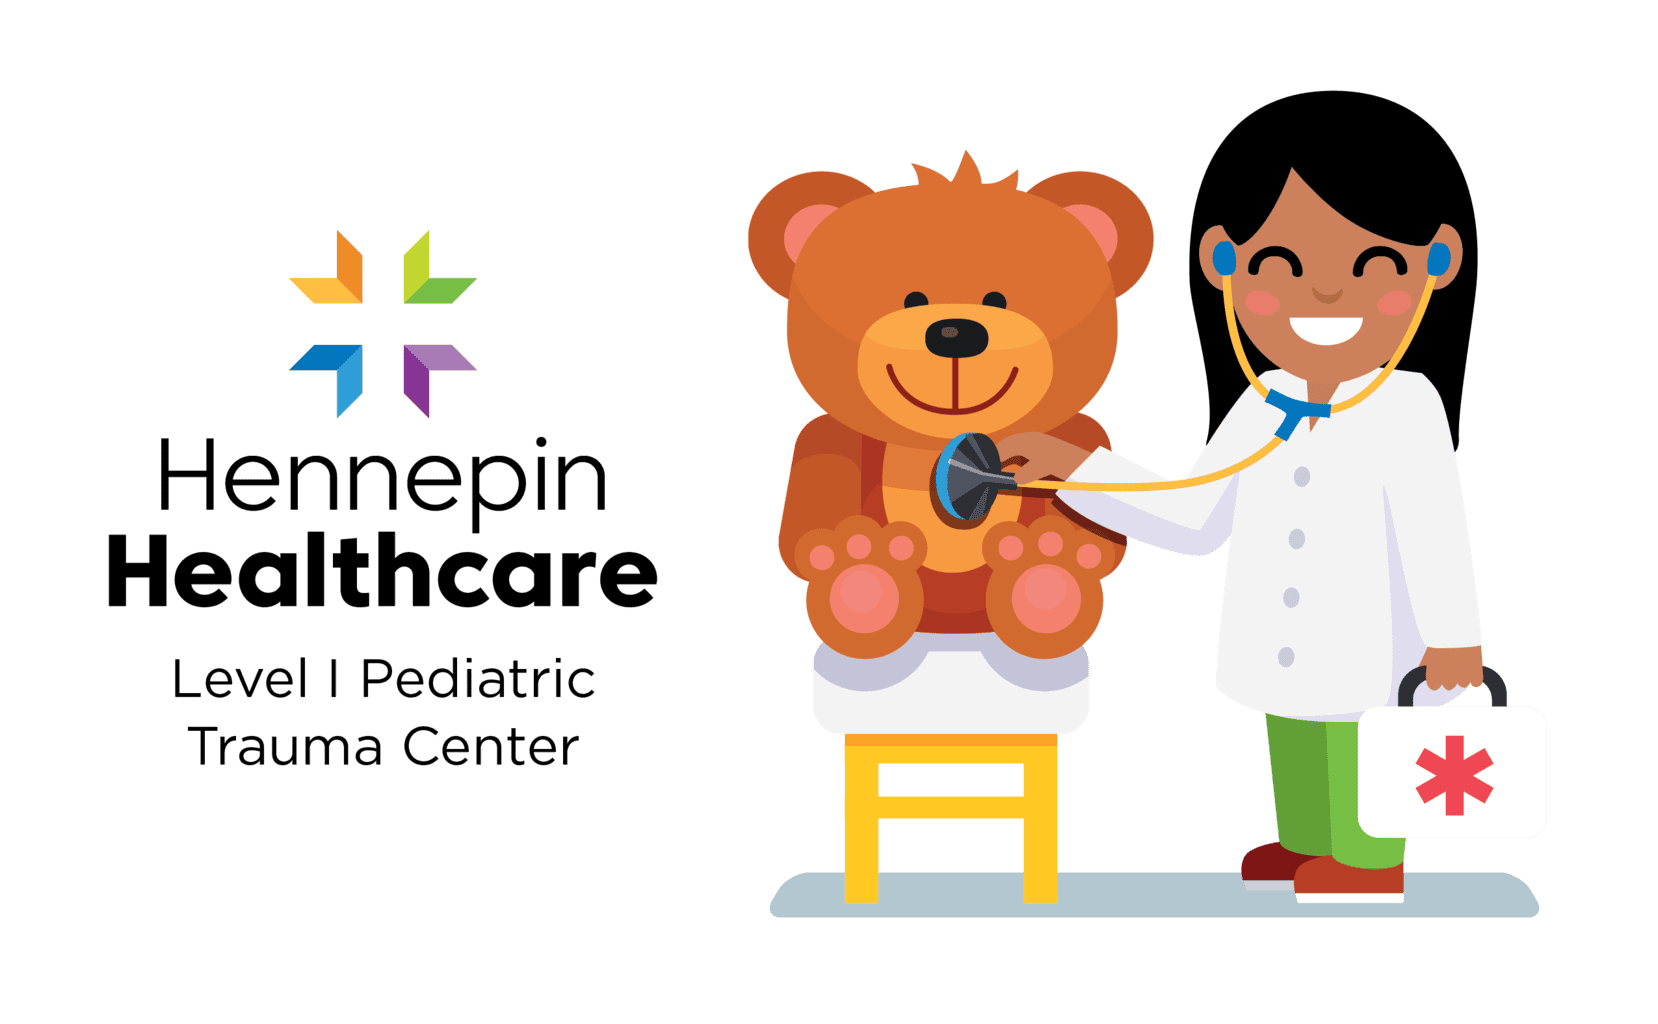 Teddy Bear Clinic, teddy bear clinic, take the scare out of emergency care, educational event to help kids, community event for kids and parents, event for children, level 1 pediatric trauma center, emergency room